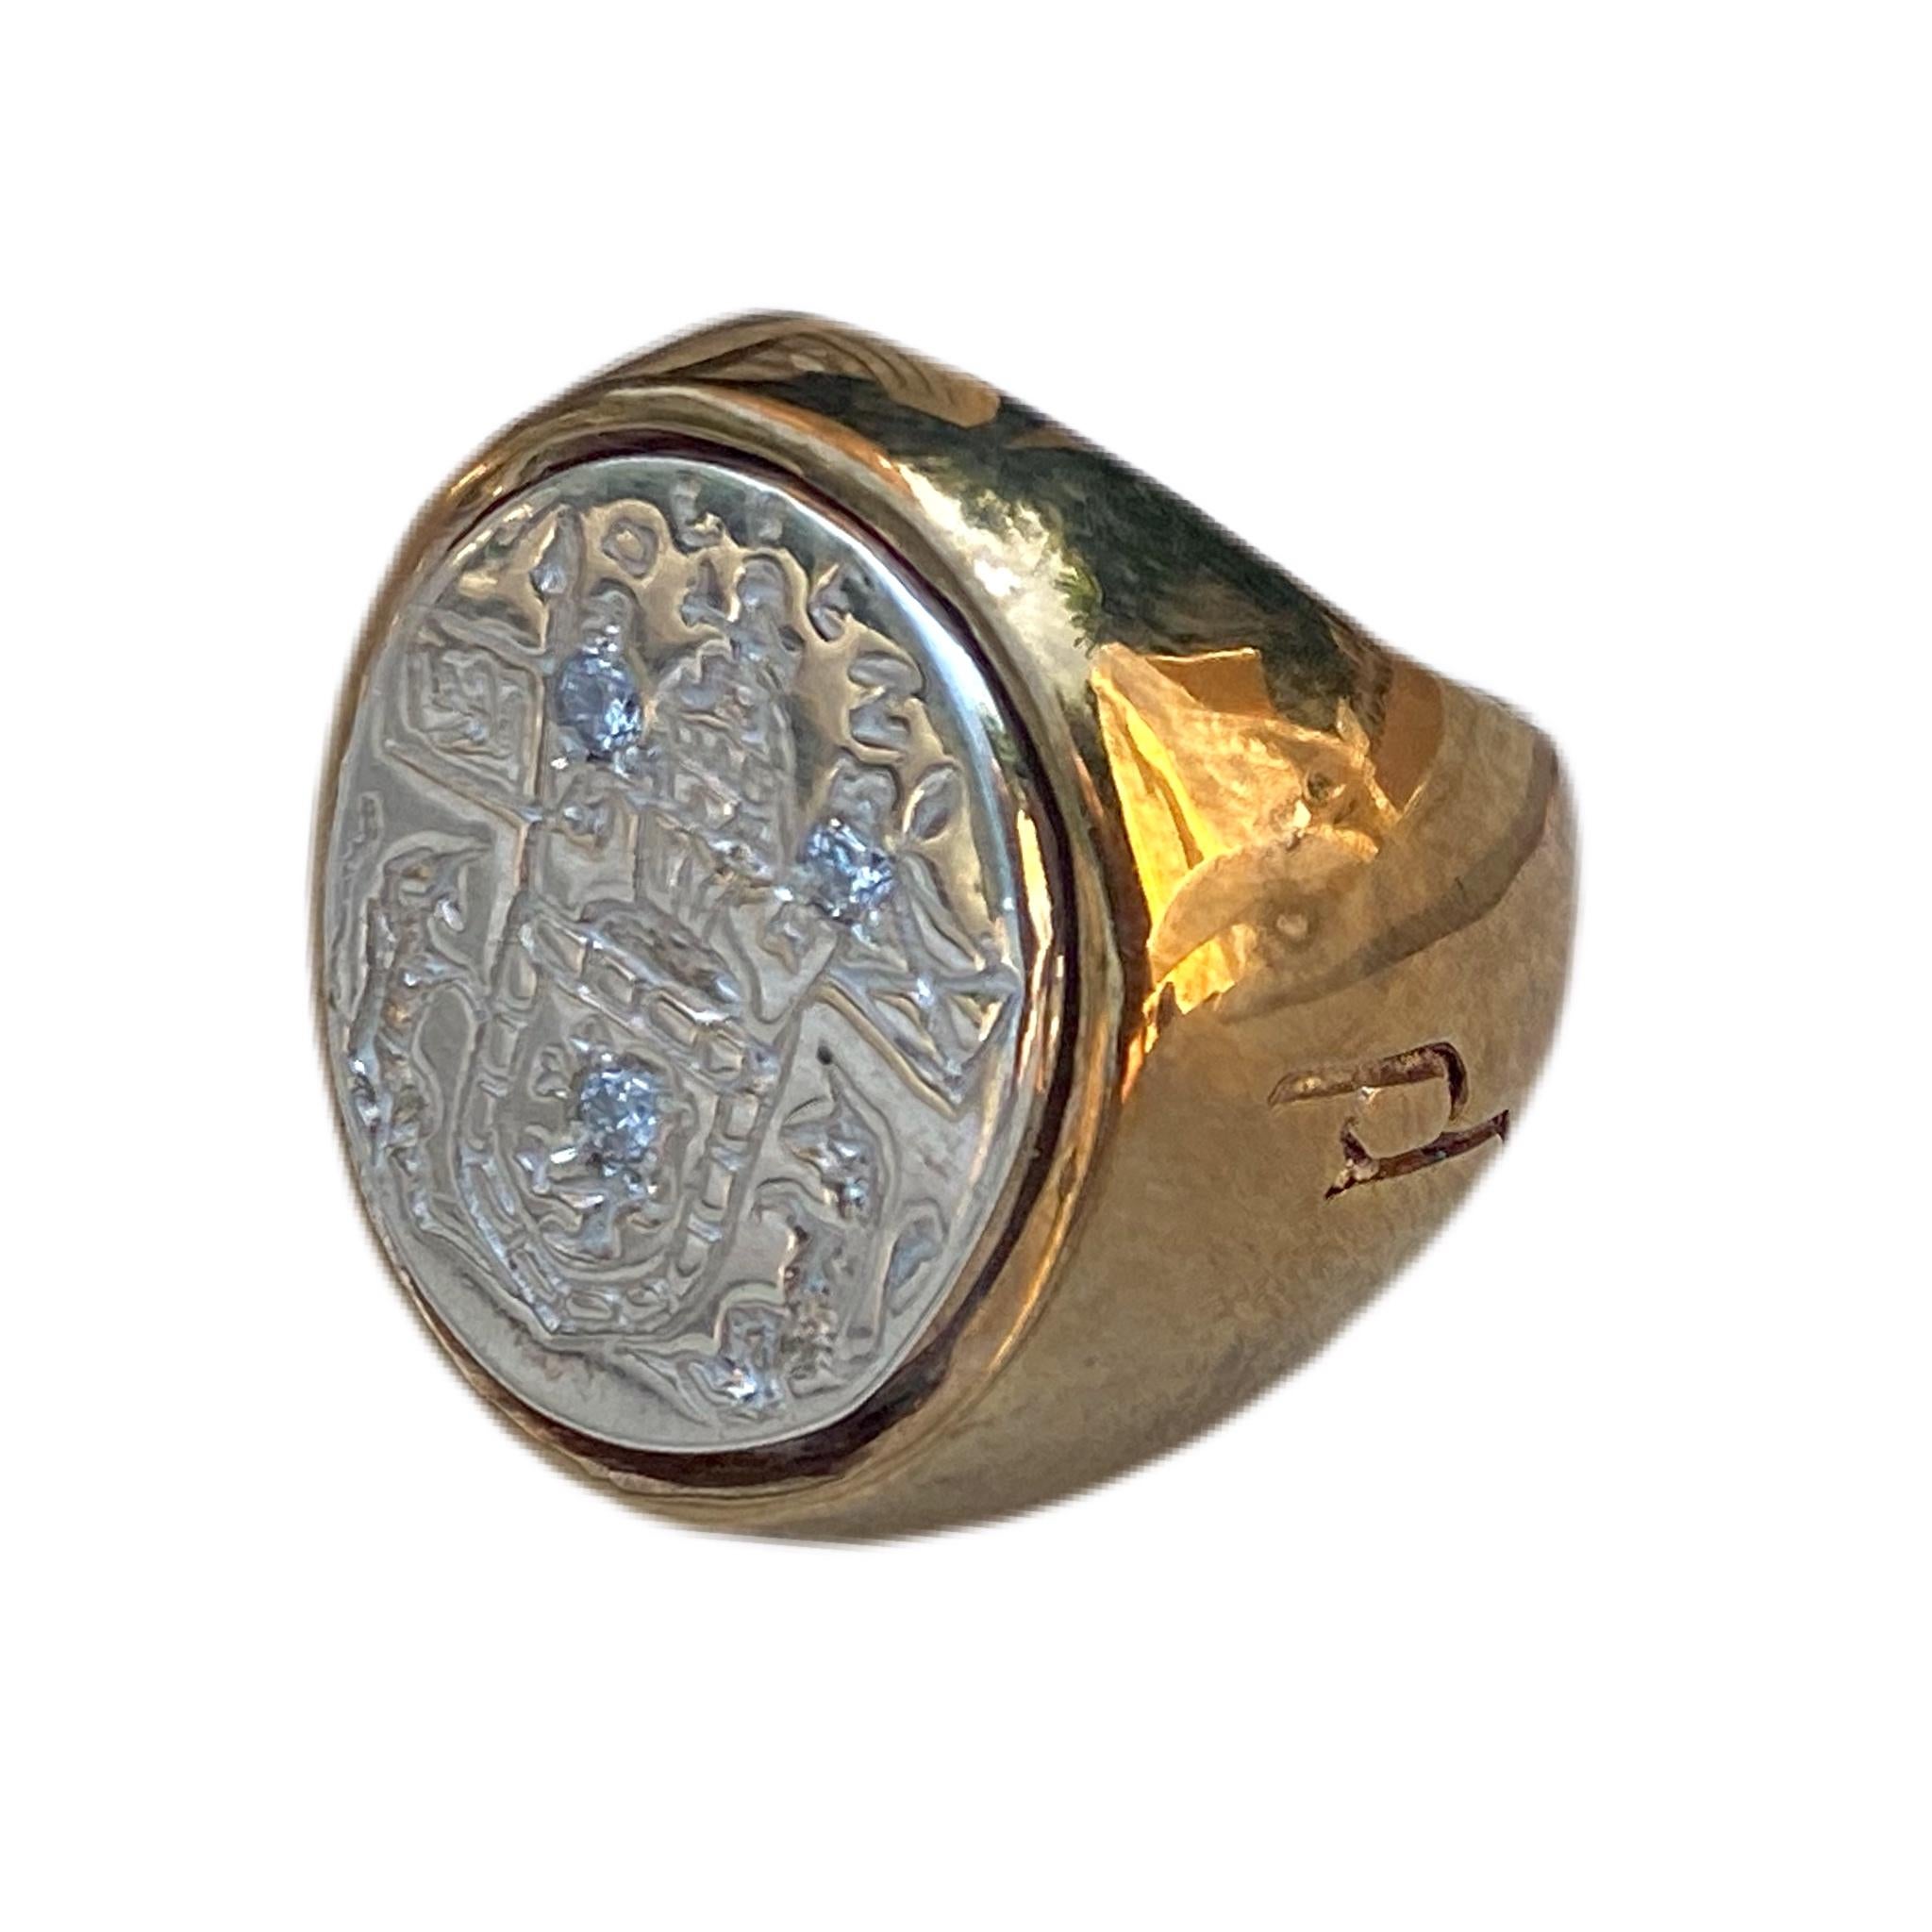 3 pcs Crest Signet Ring Sterling Silver Bronze White Diamond Unisex J Dauphin can be worn by women or men.

Inspired by Queen Mary of Scots ring. Gold signet-ring; engraved; shoulders ornamented with flowers and leaves. Oval bezel set with silver